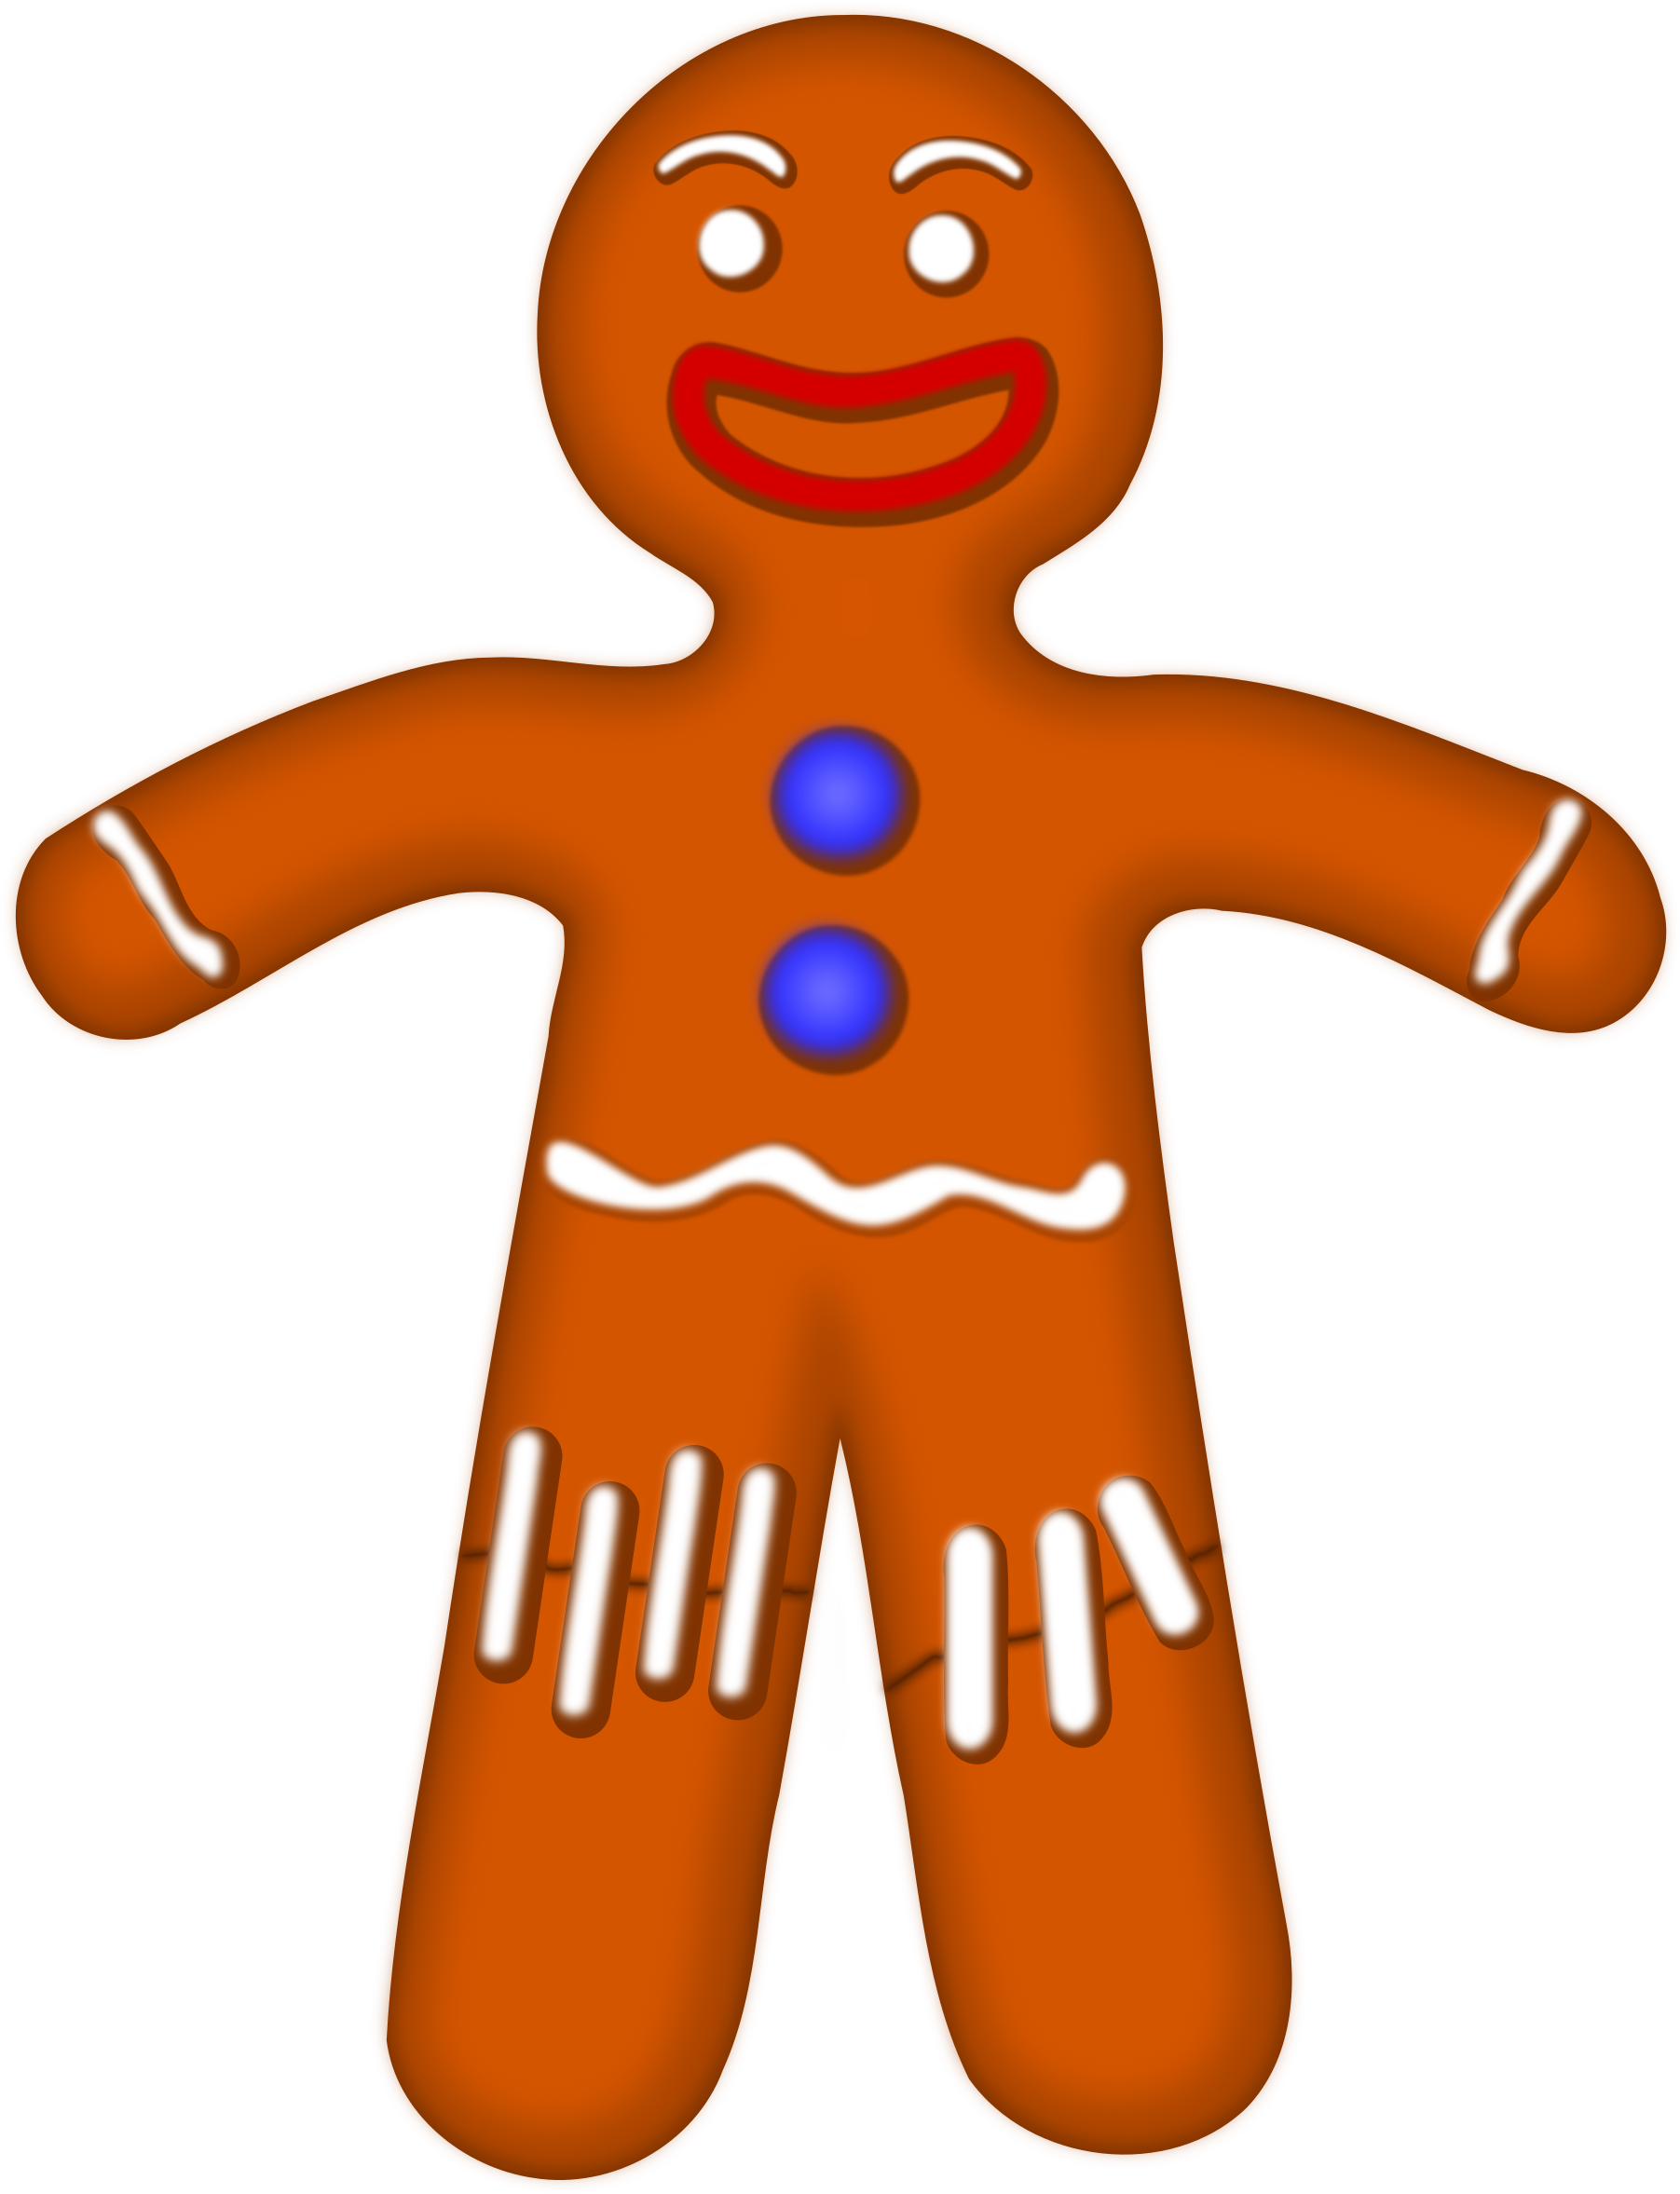 Clipart Of Gingerbread Man - Clipart Of Gingerbread Man (1848x2400)